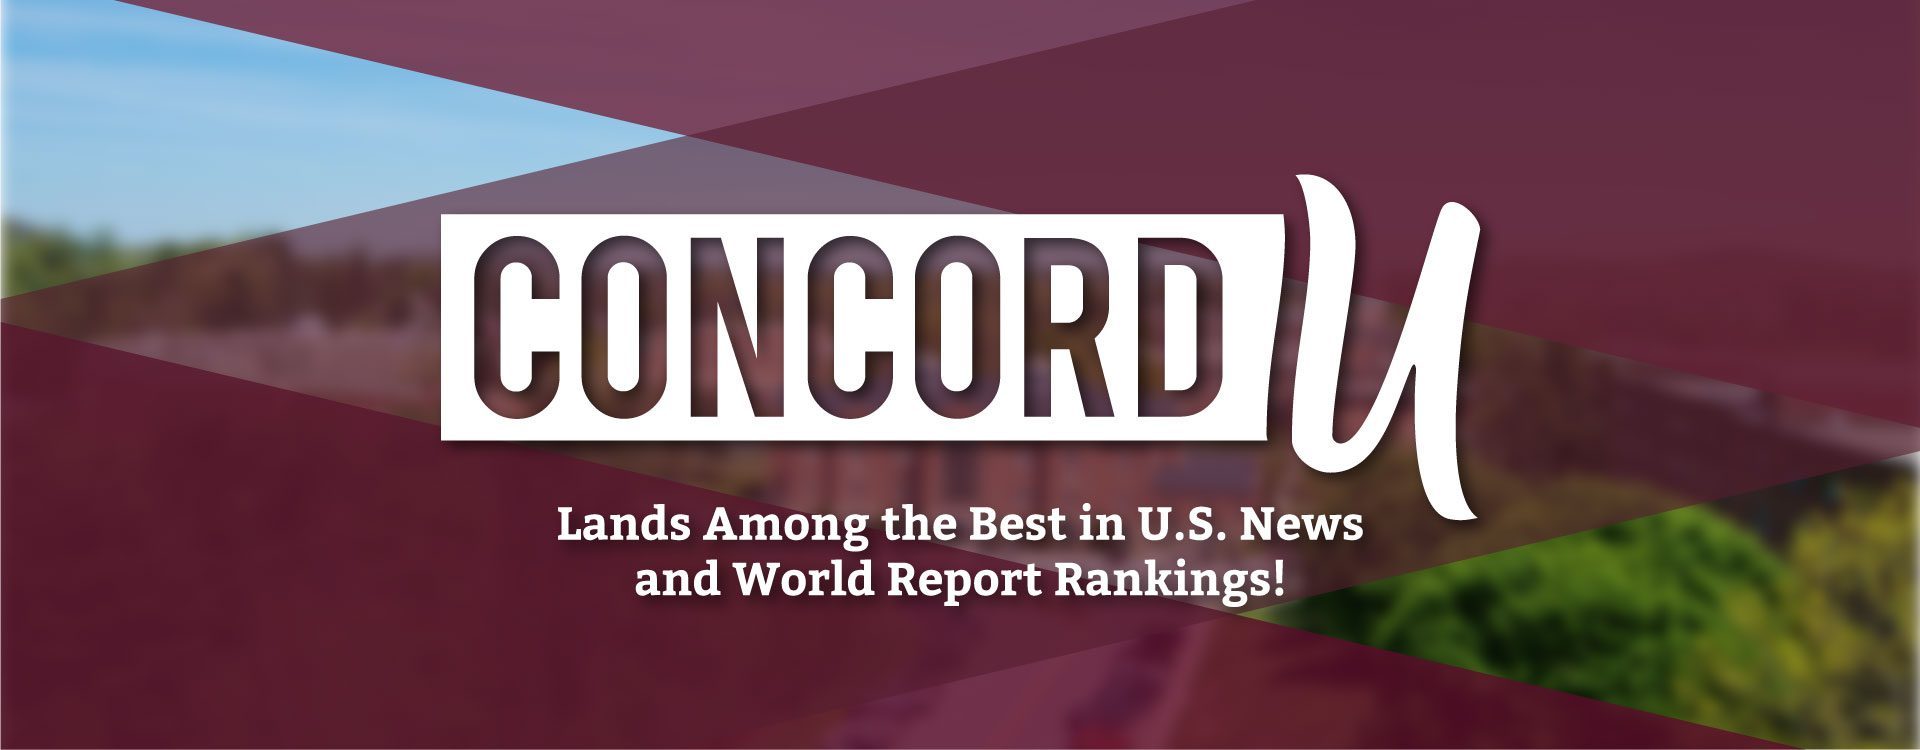 Concord University Lands Among The Best In U.S. News and World Report Rankings! Click here to read more